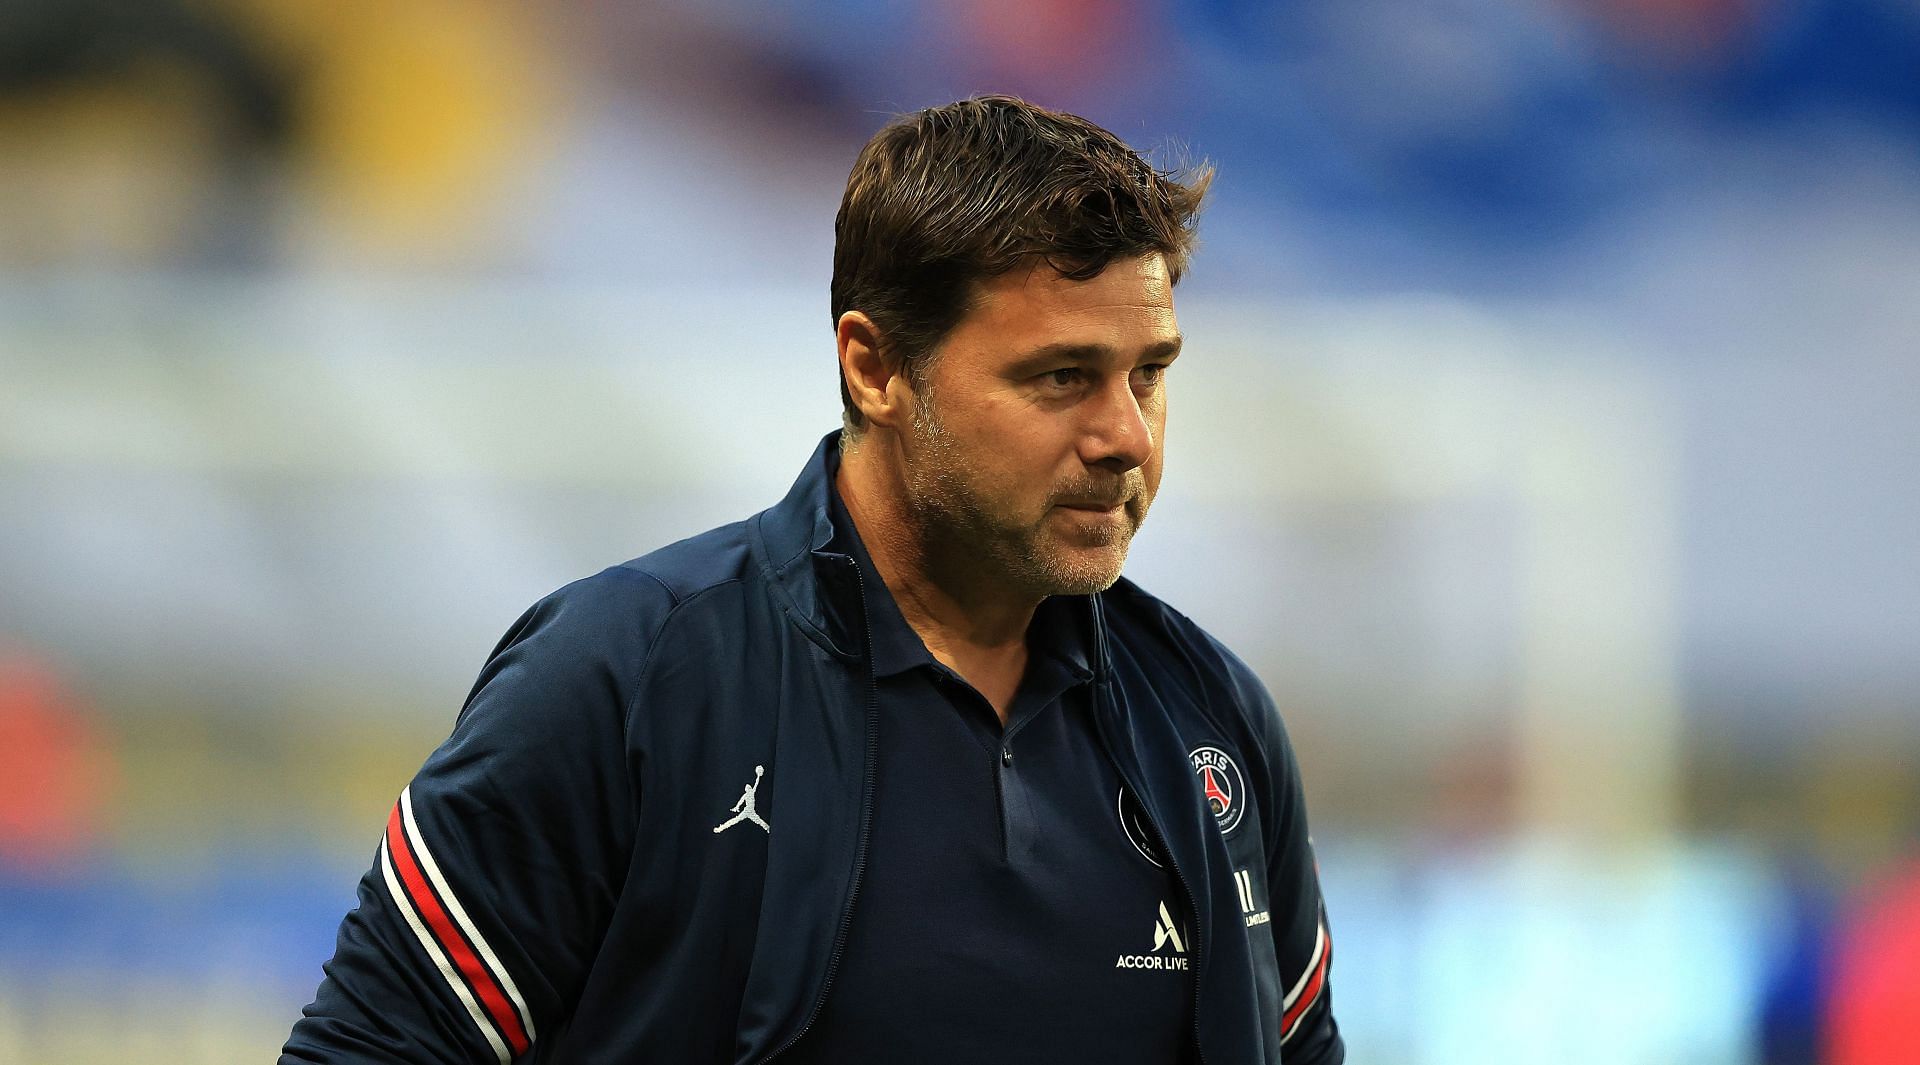 Mauricio Pochettino is contemplating leaving PSG once his current contract expires in 2023.